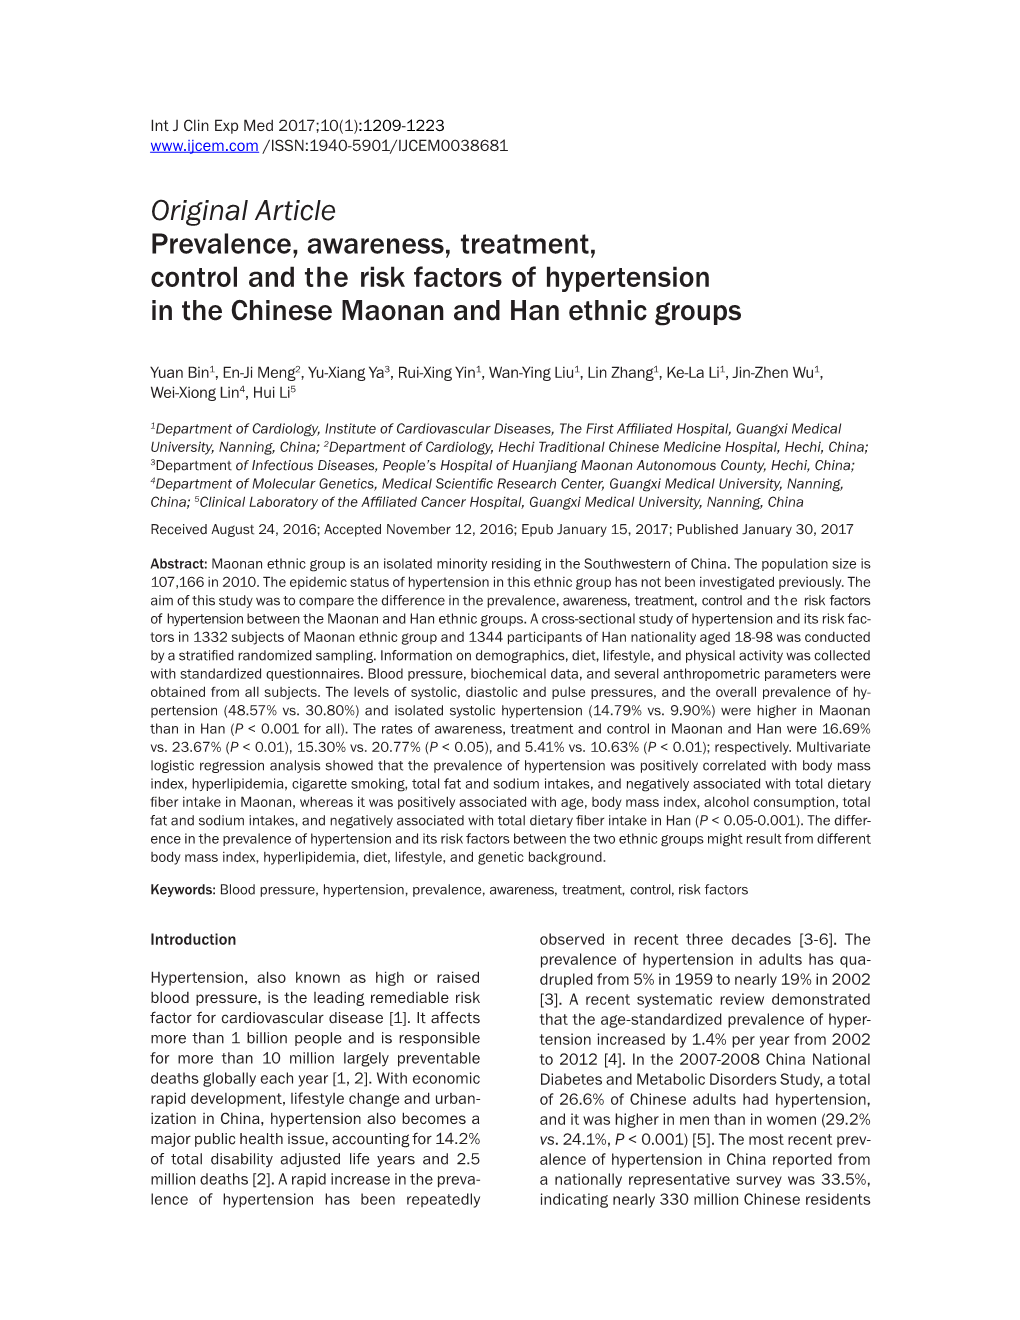 Original Article Prevalence, Awareness, Treatment, Control and the Risk Factors of Hypertension in the Chinese Maonan and Han Ethnic Groups